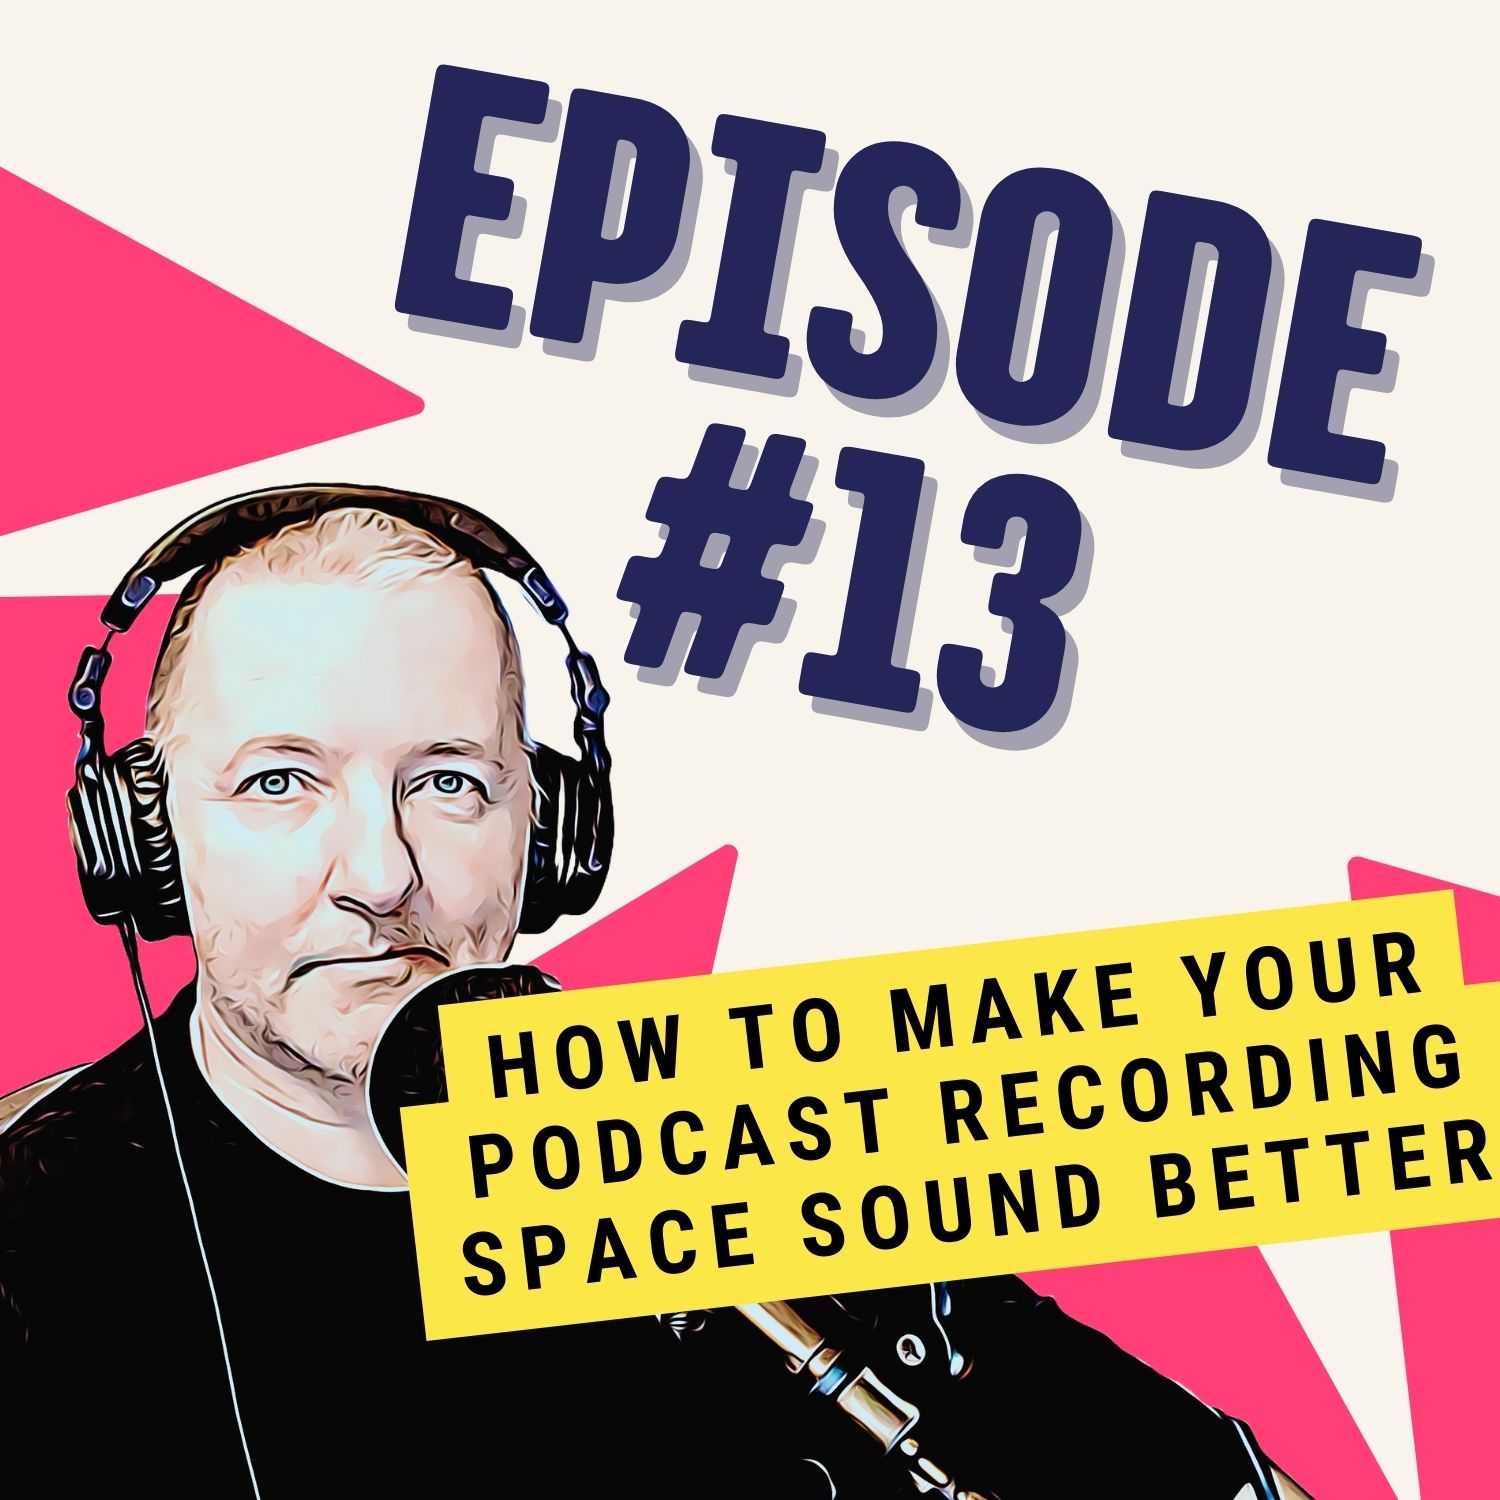 How to Make Your Podcast Recording Space Sound Better